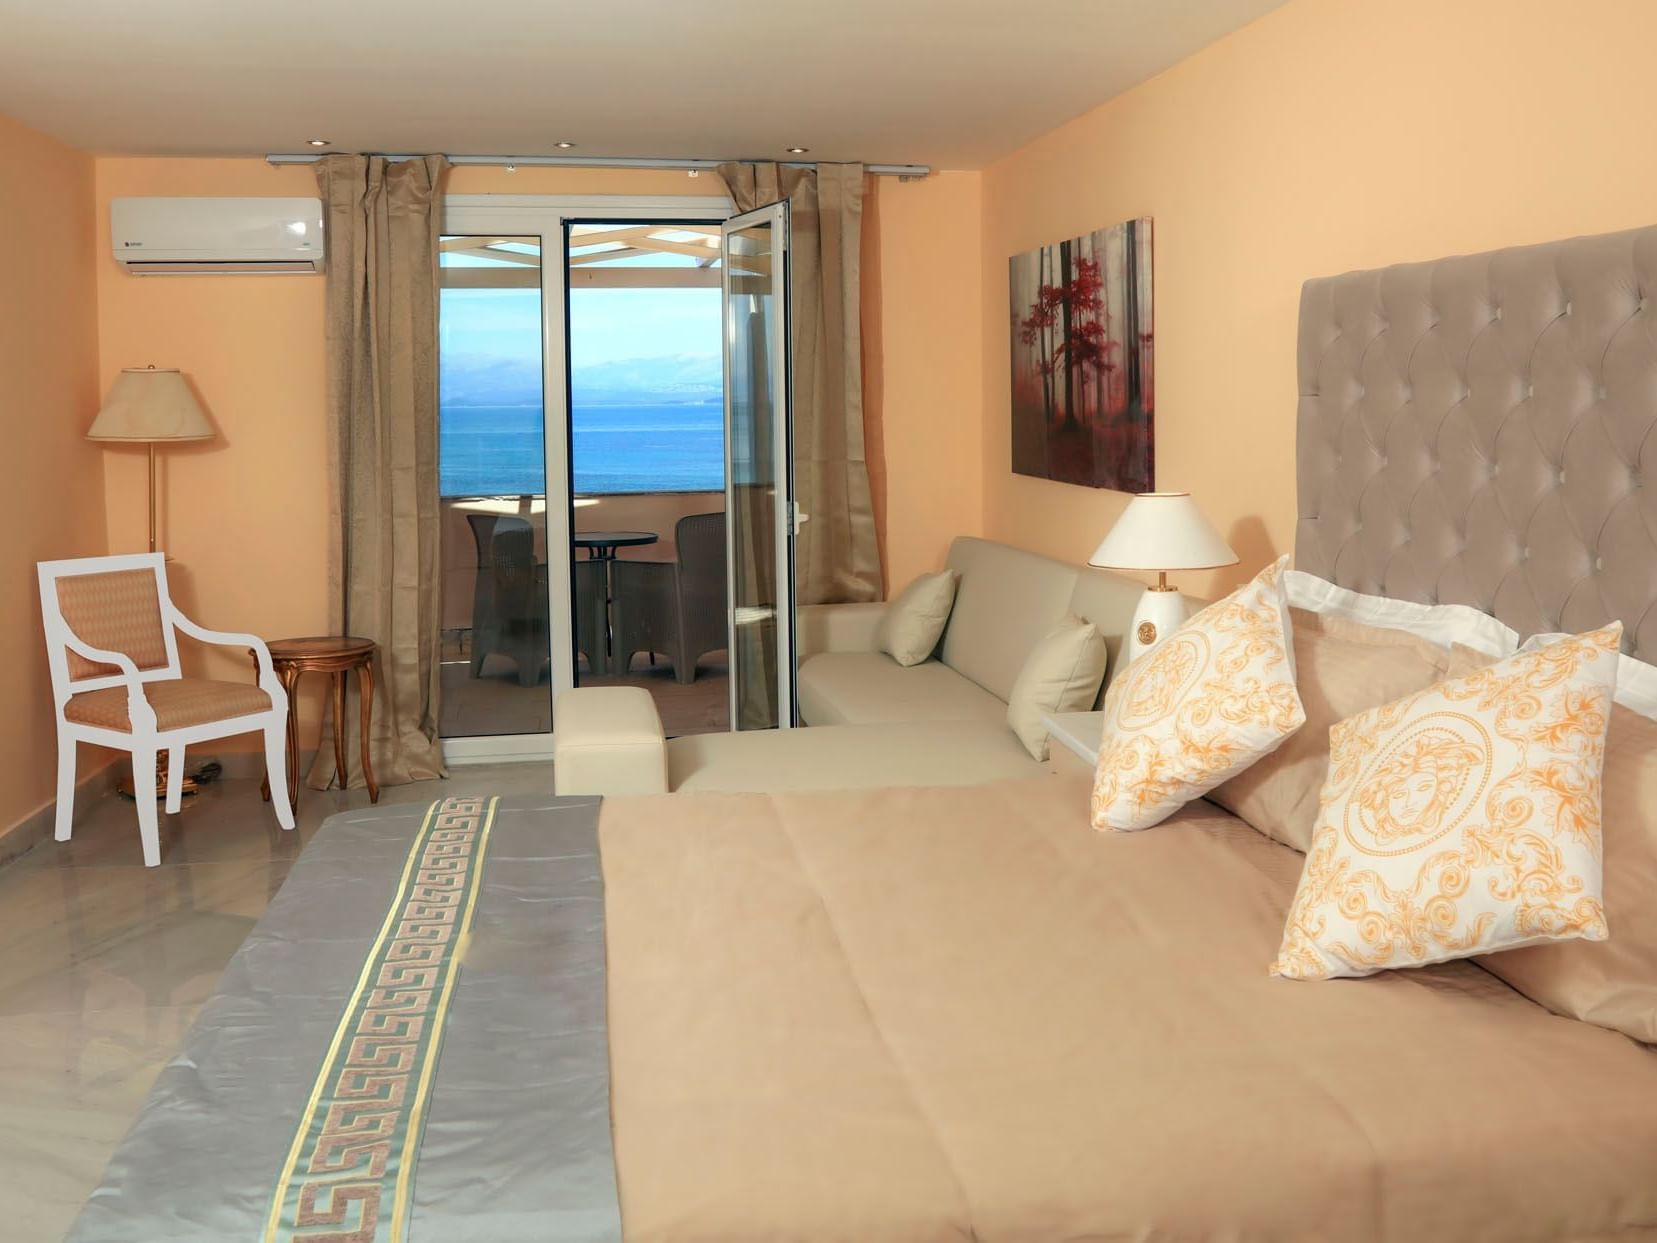 Interior of Rooftop Penthouse Room at Cavomarina Beach hotel